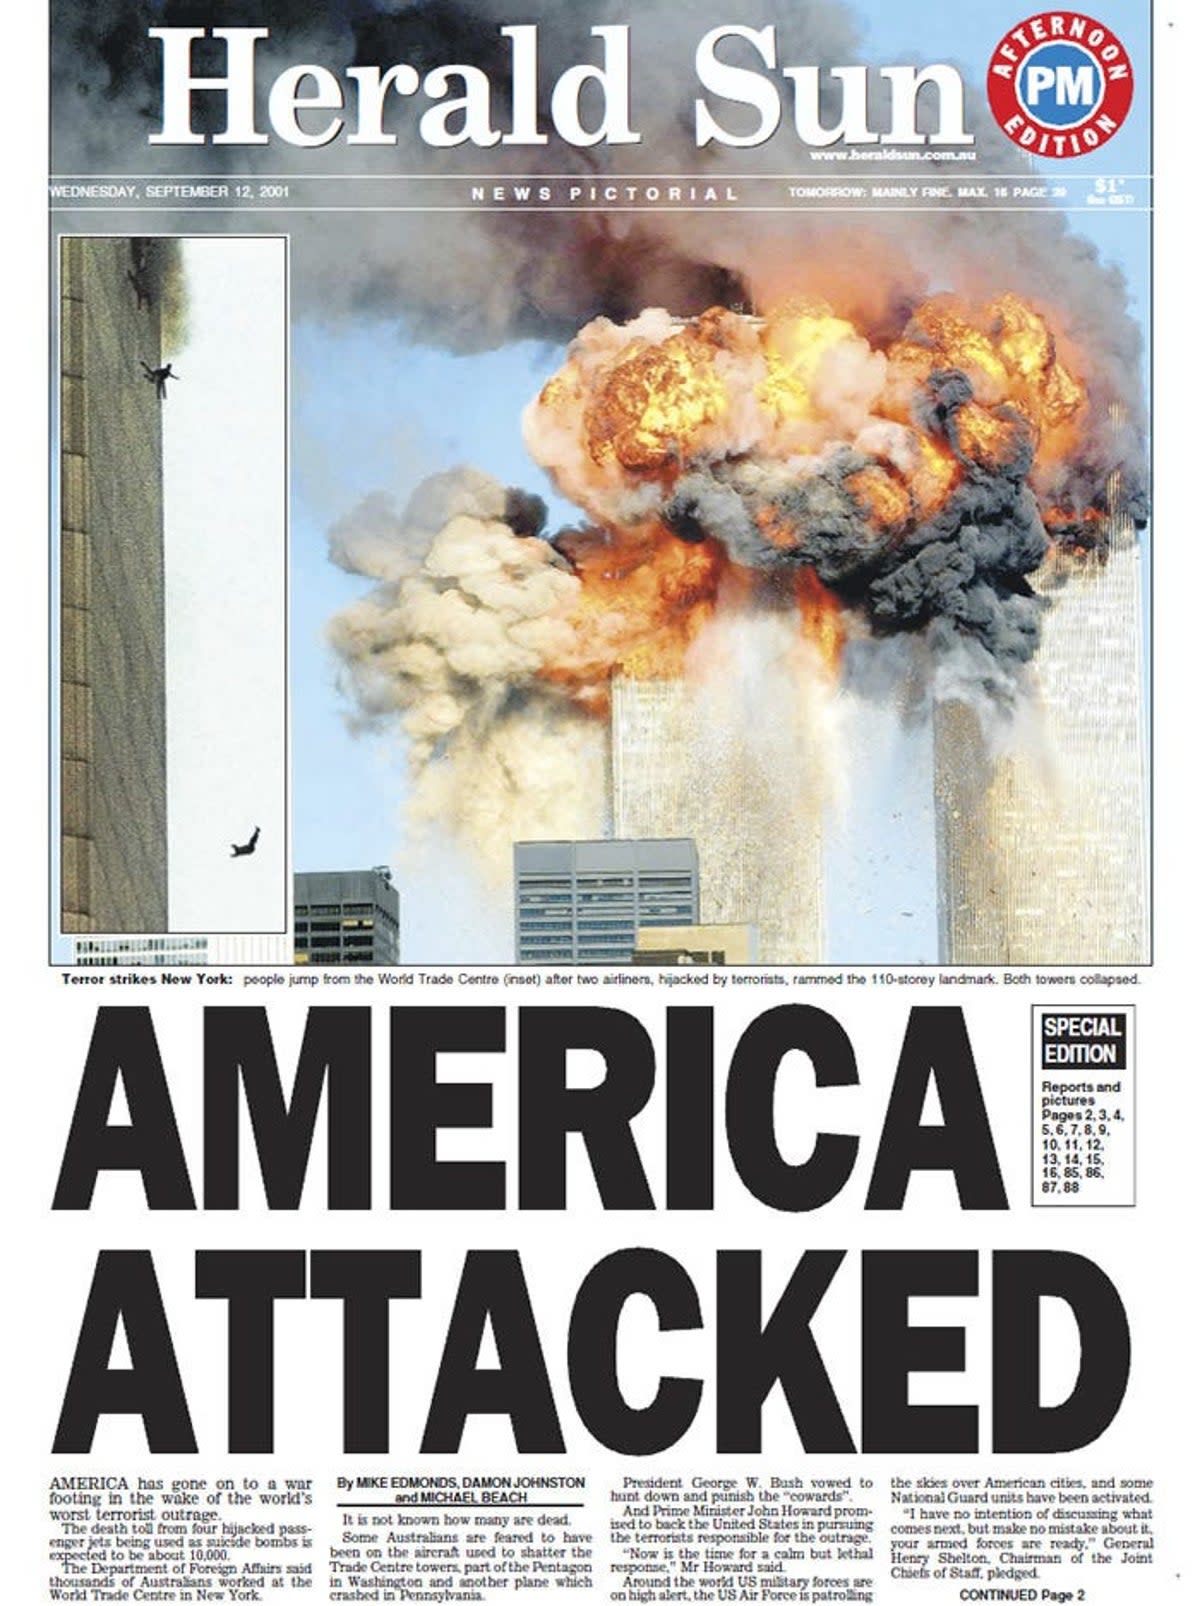 The front page of Melbourne, Australia newspaper the Herald Sun on 12 September, 2001 (Herald Sun)